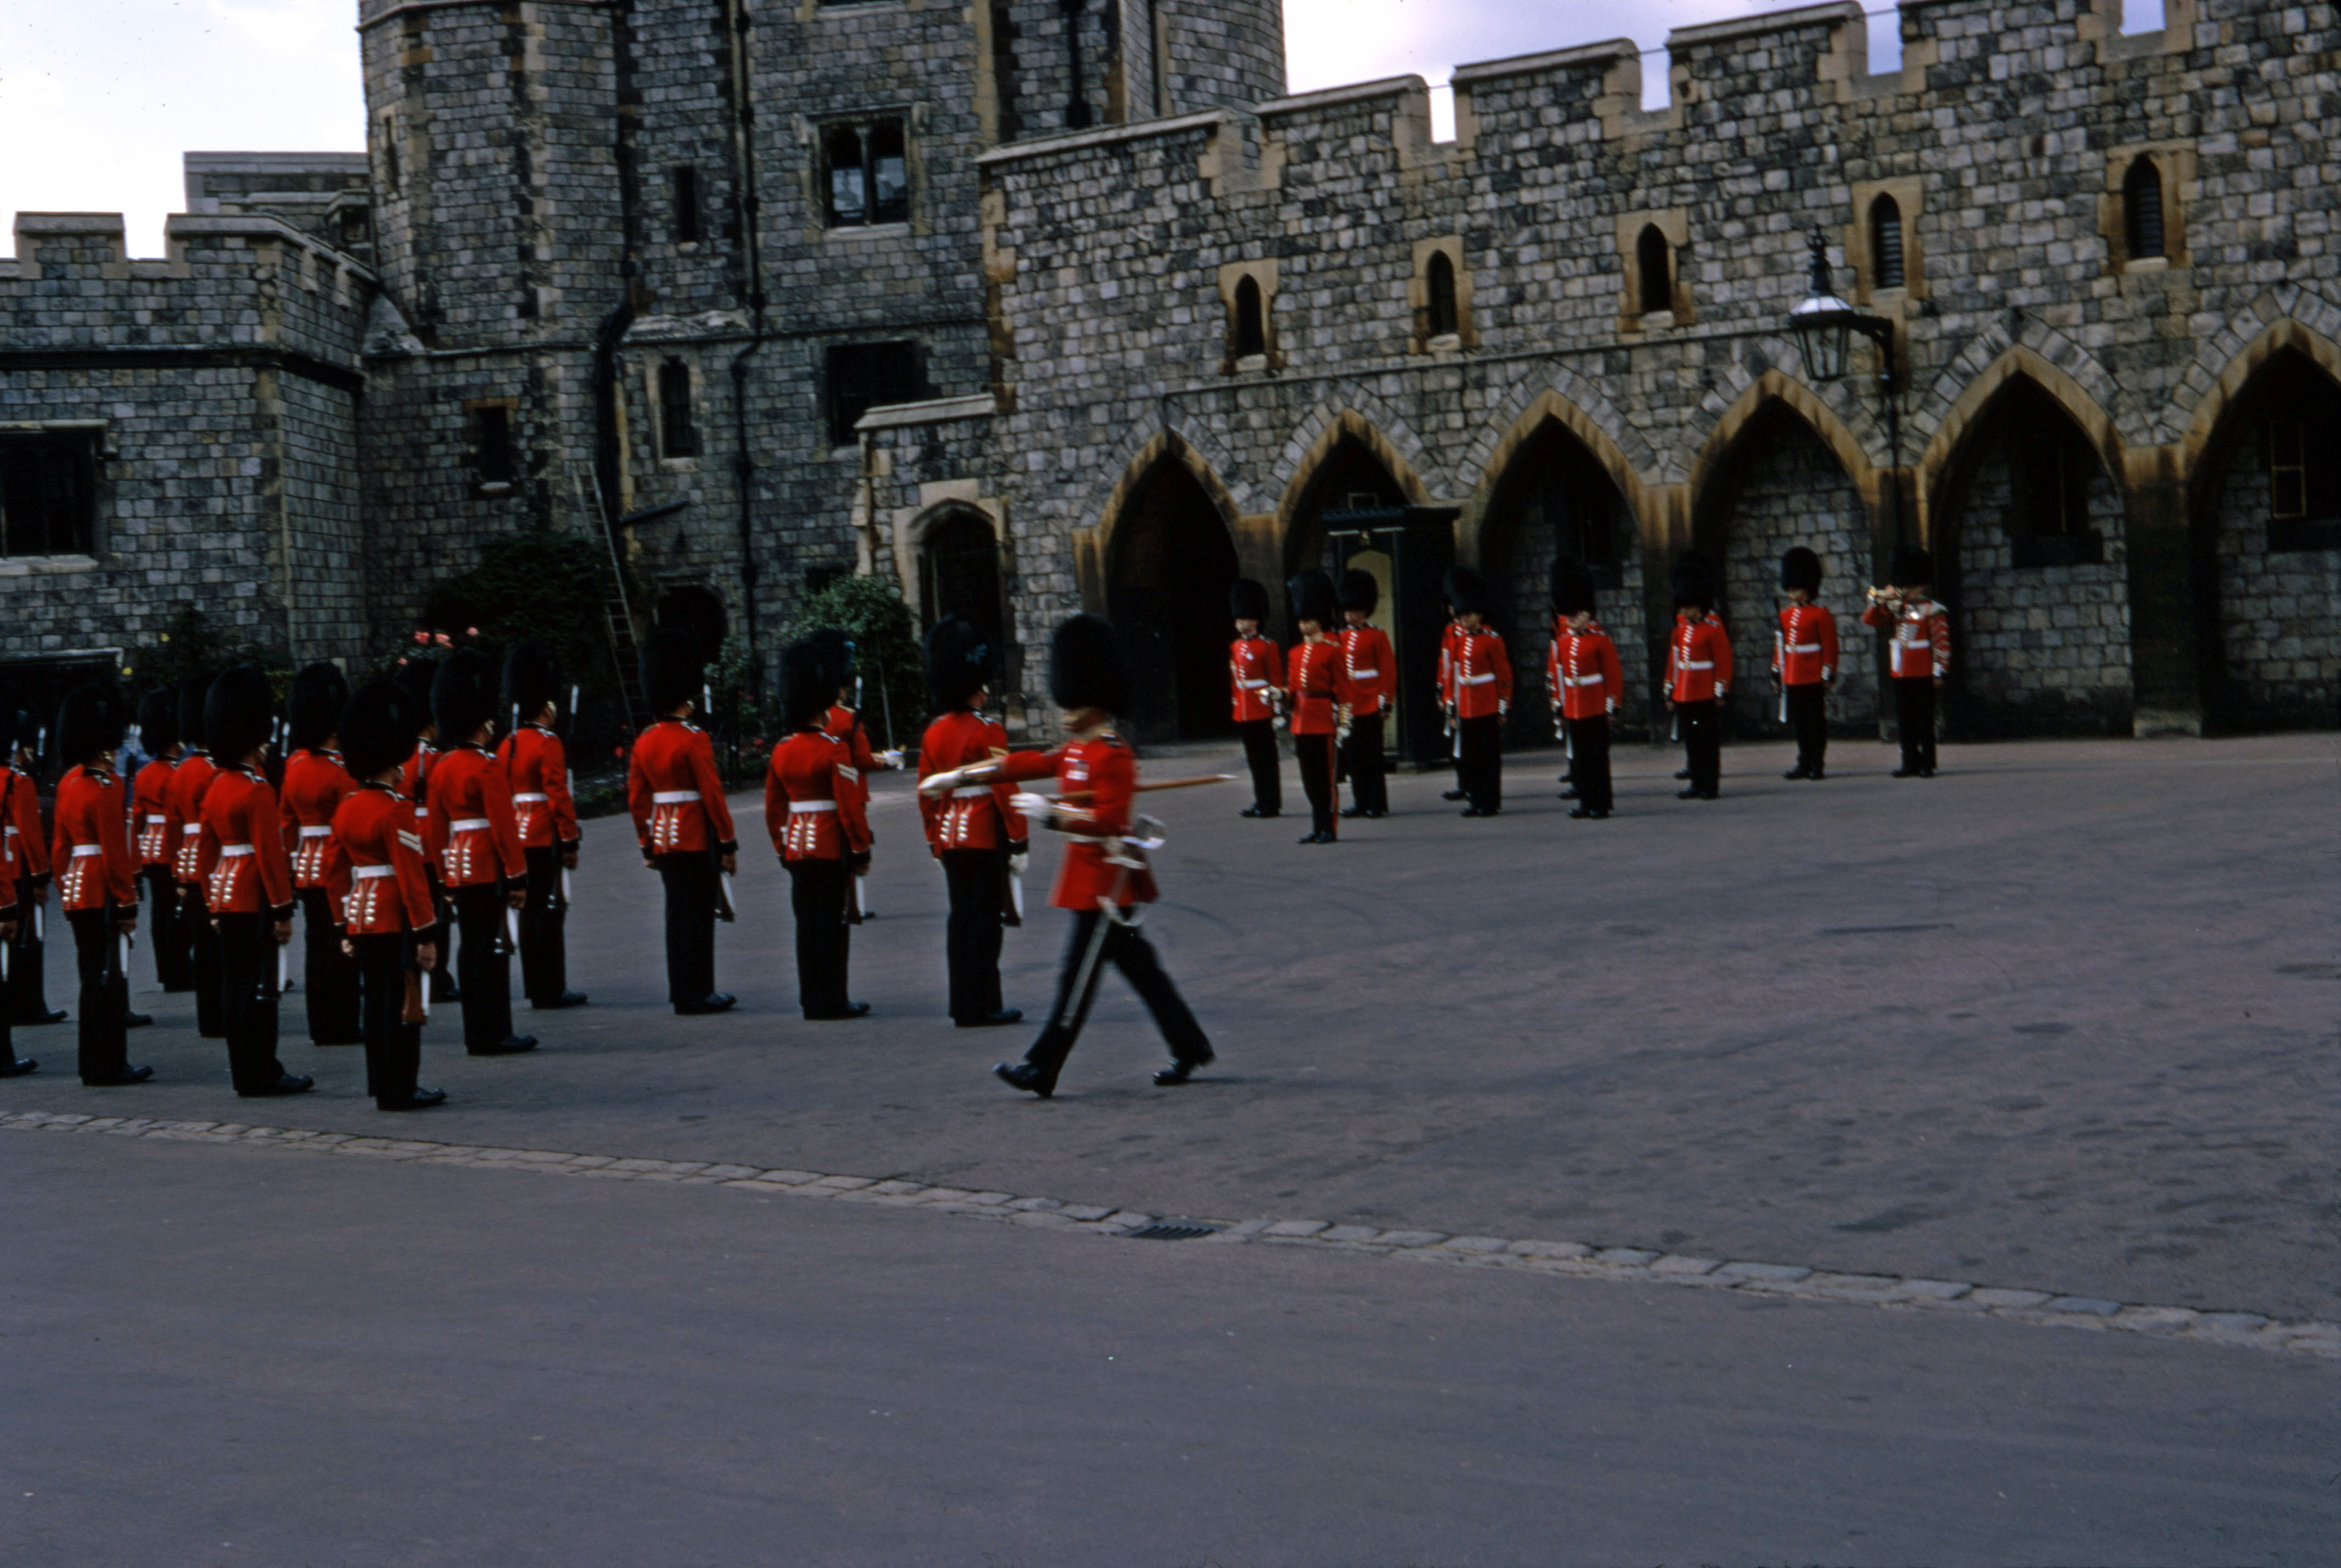 31 Aug 1969 The're changing guard (but at Windsor, not Buckingham Palace!)